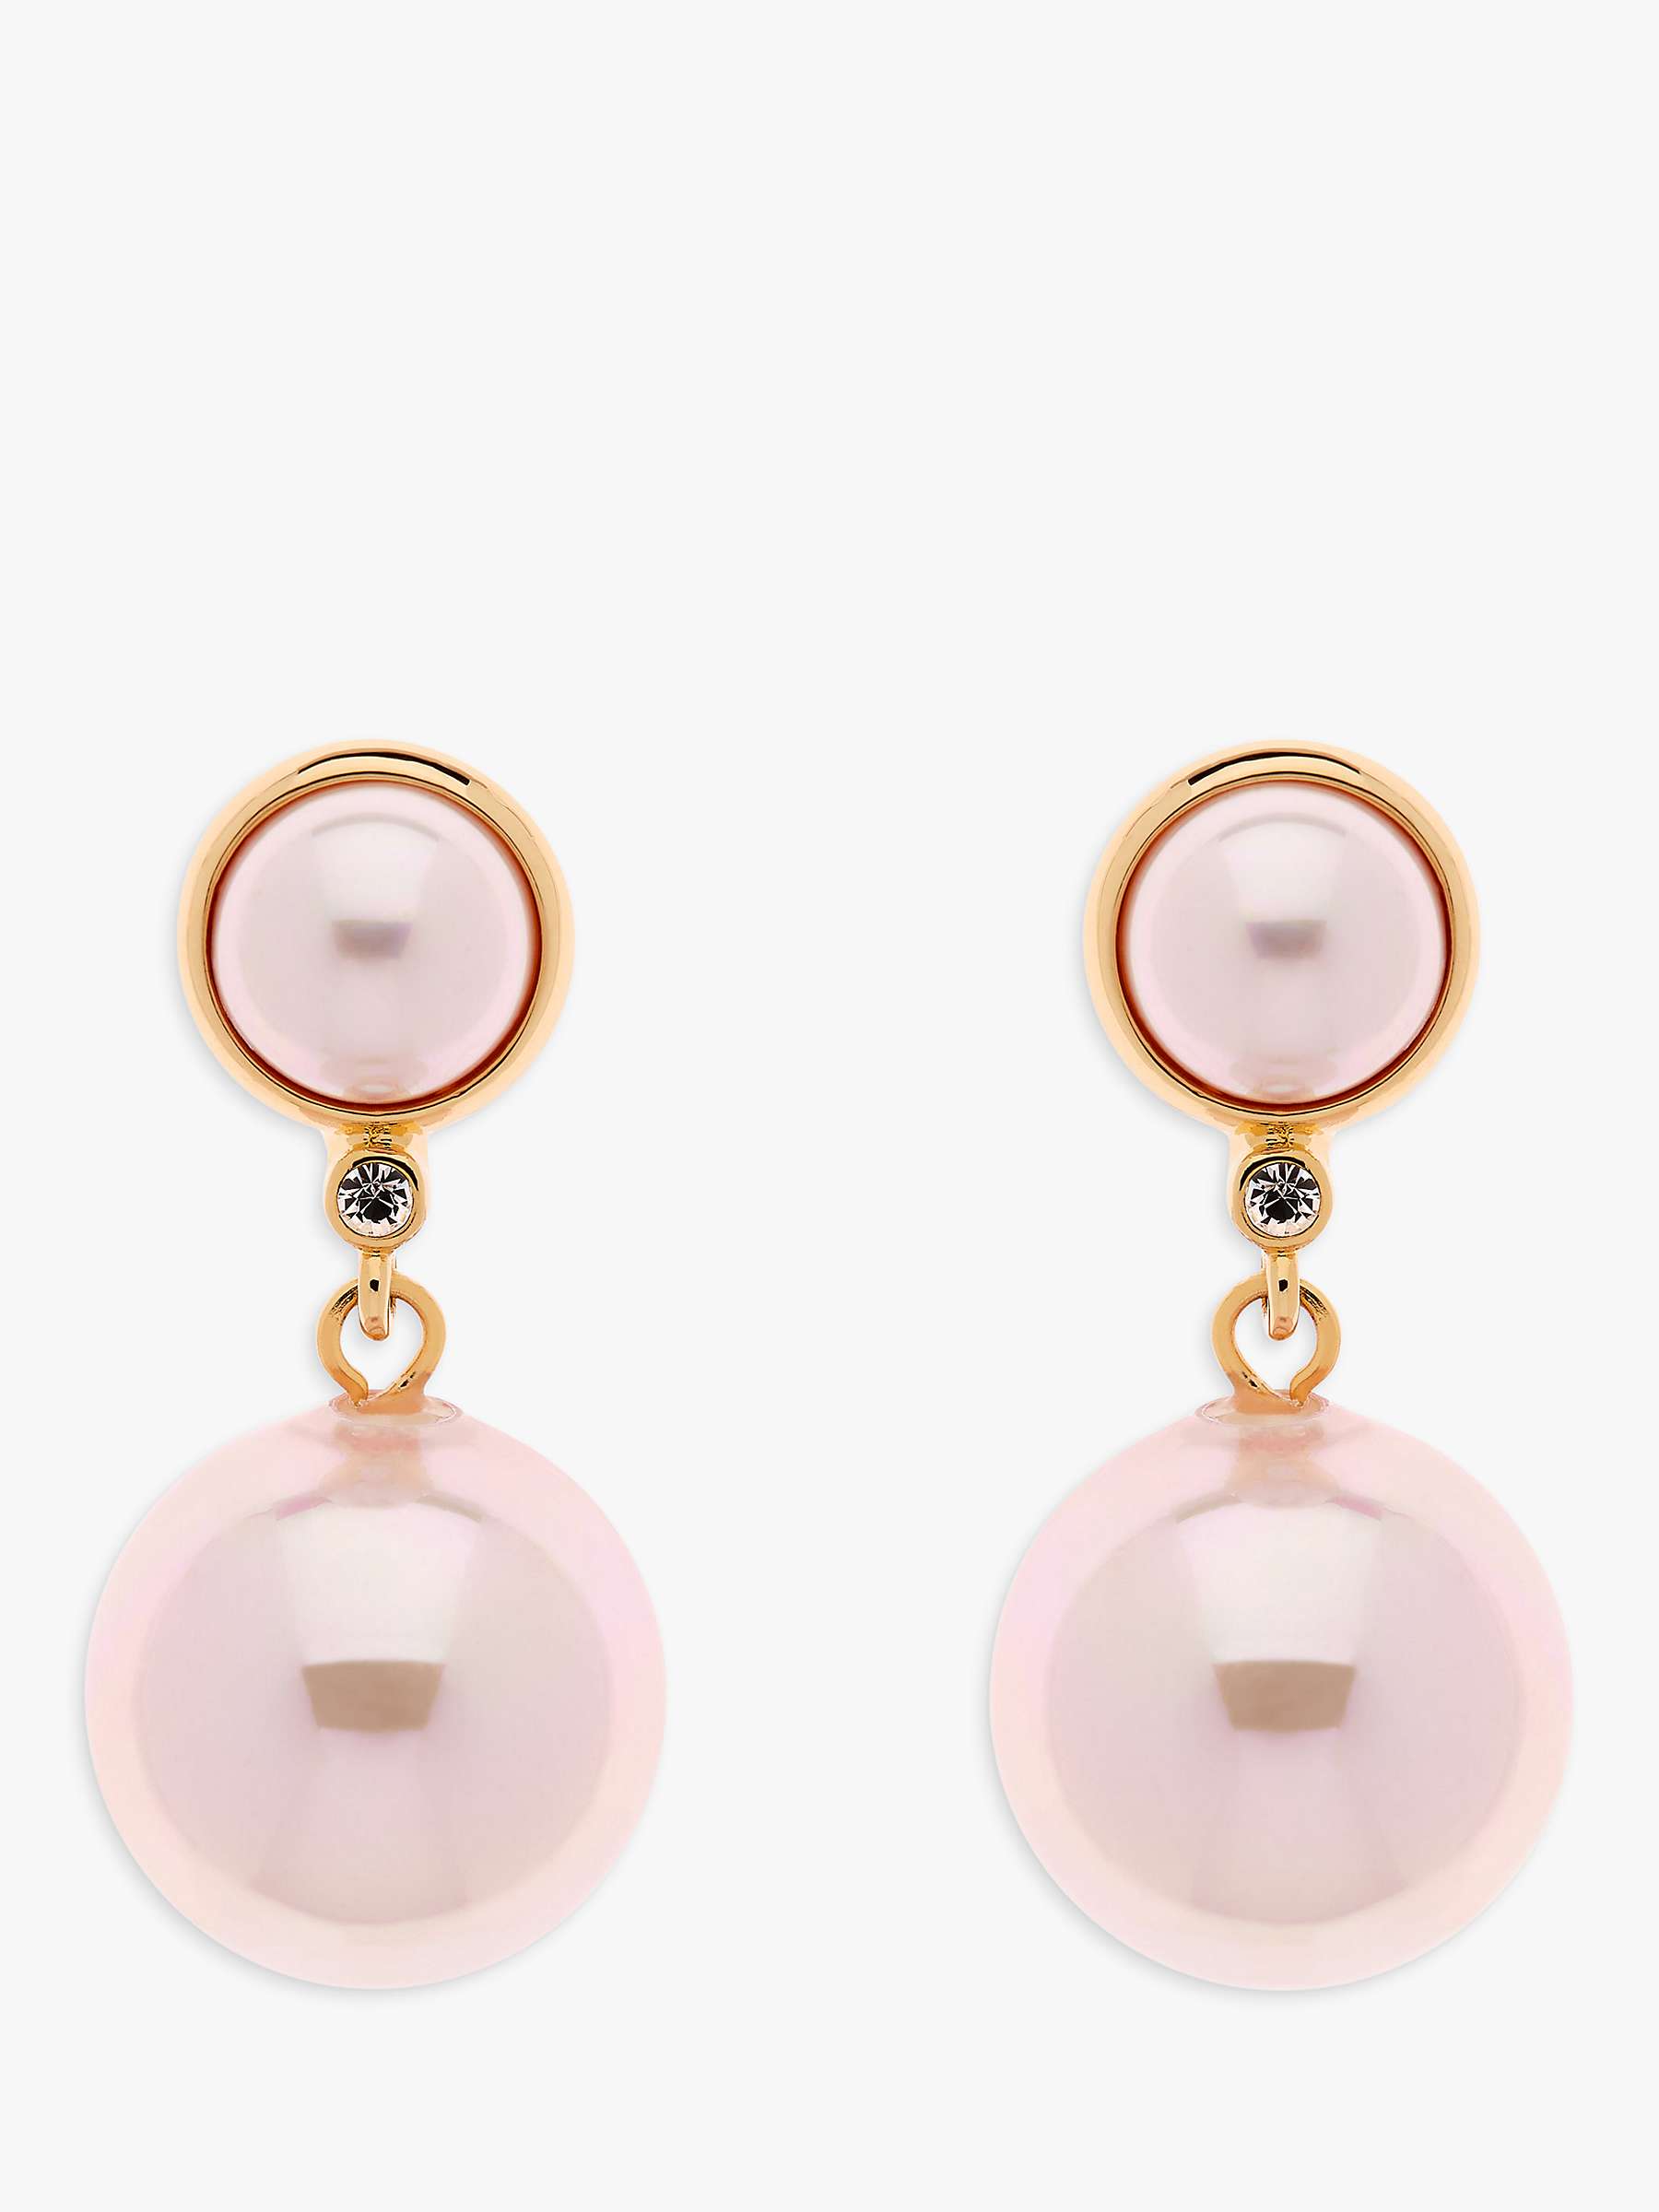 Buy Emma Holland Pink Pearl Duo Clip-On Earrings, Gold Online at johnlewis.com